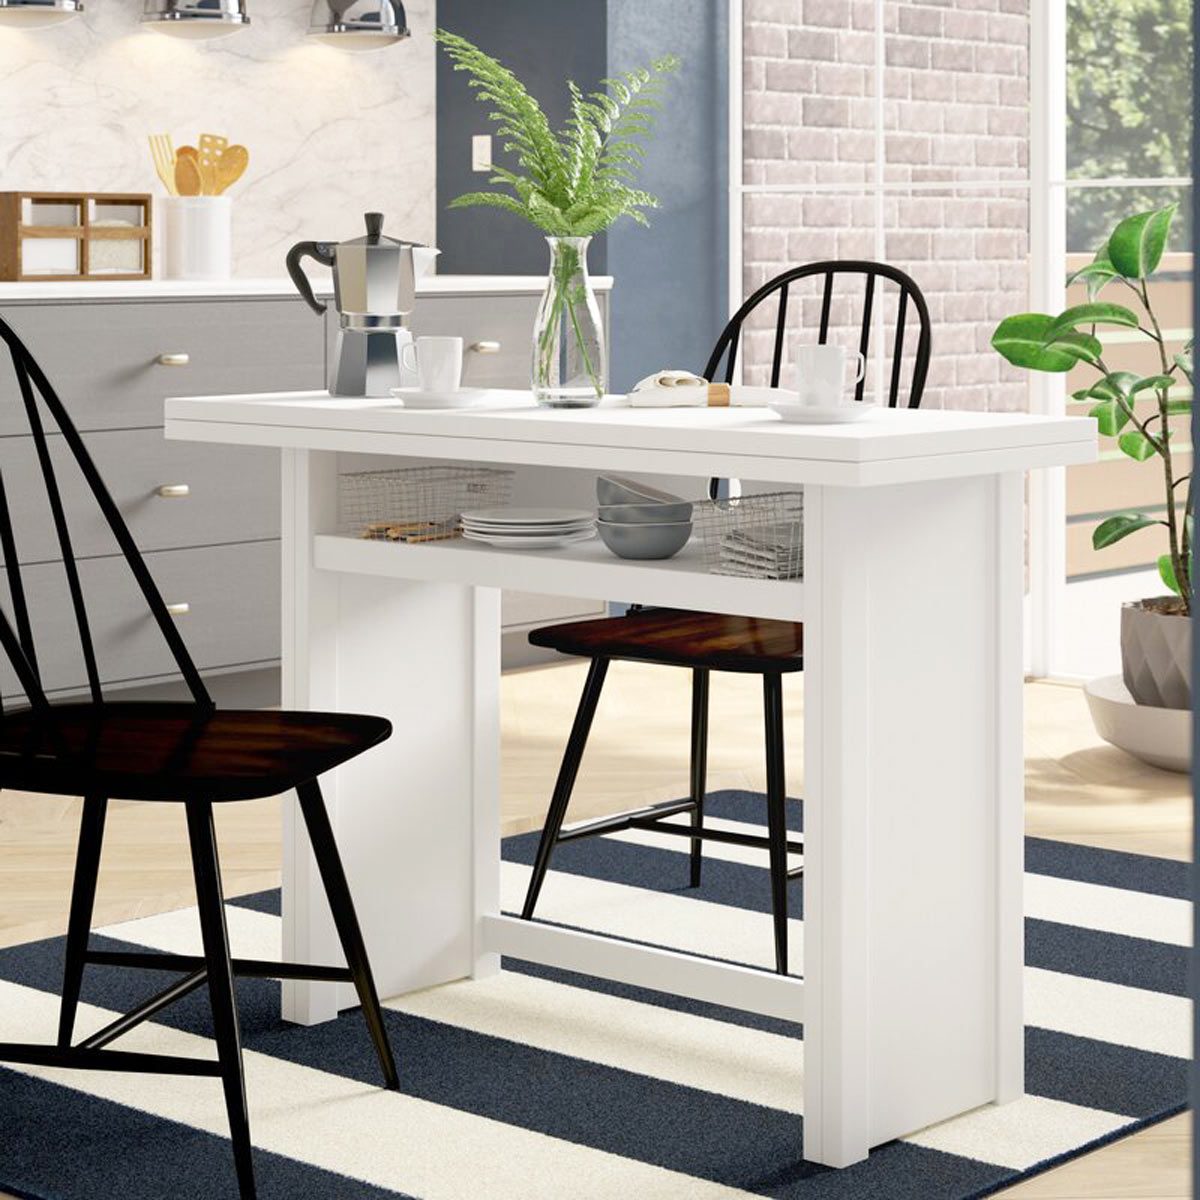 best kitchen tables for small spaces Kitchen table small dining modern
tables spaces room sets contemporary granite chairs dinette helsinki
transitional rectangular seating kitchens cool minimalist